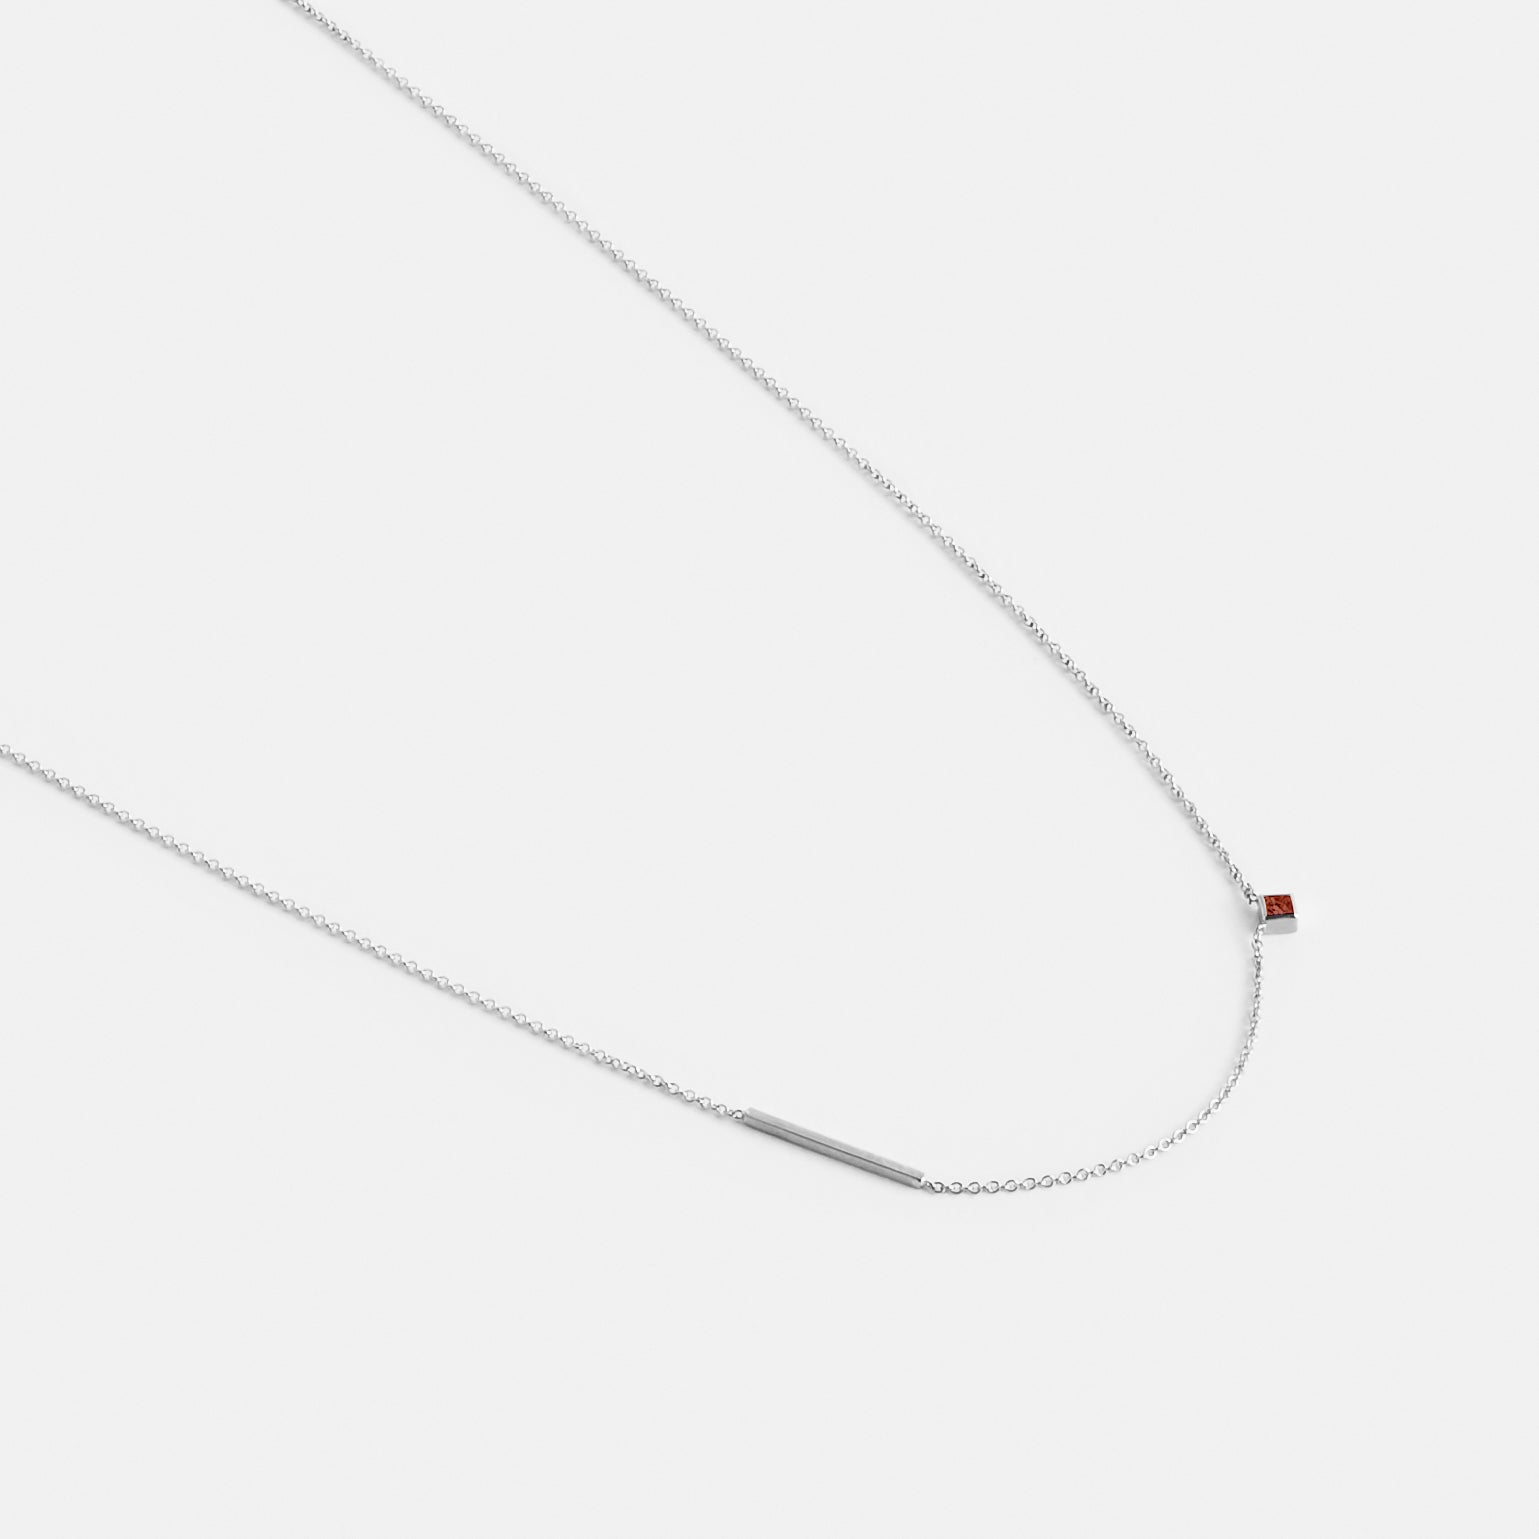 Inu Minimalist Necklace in 14k White Gold Set with Ruby By SHW Fine Jewelry NYC